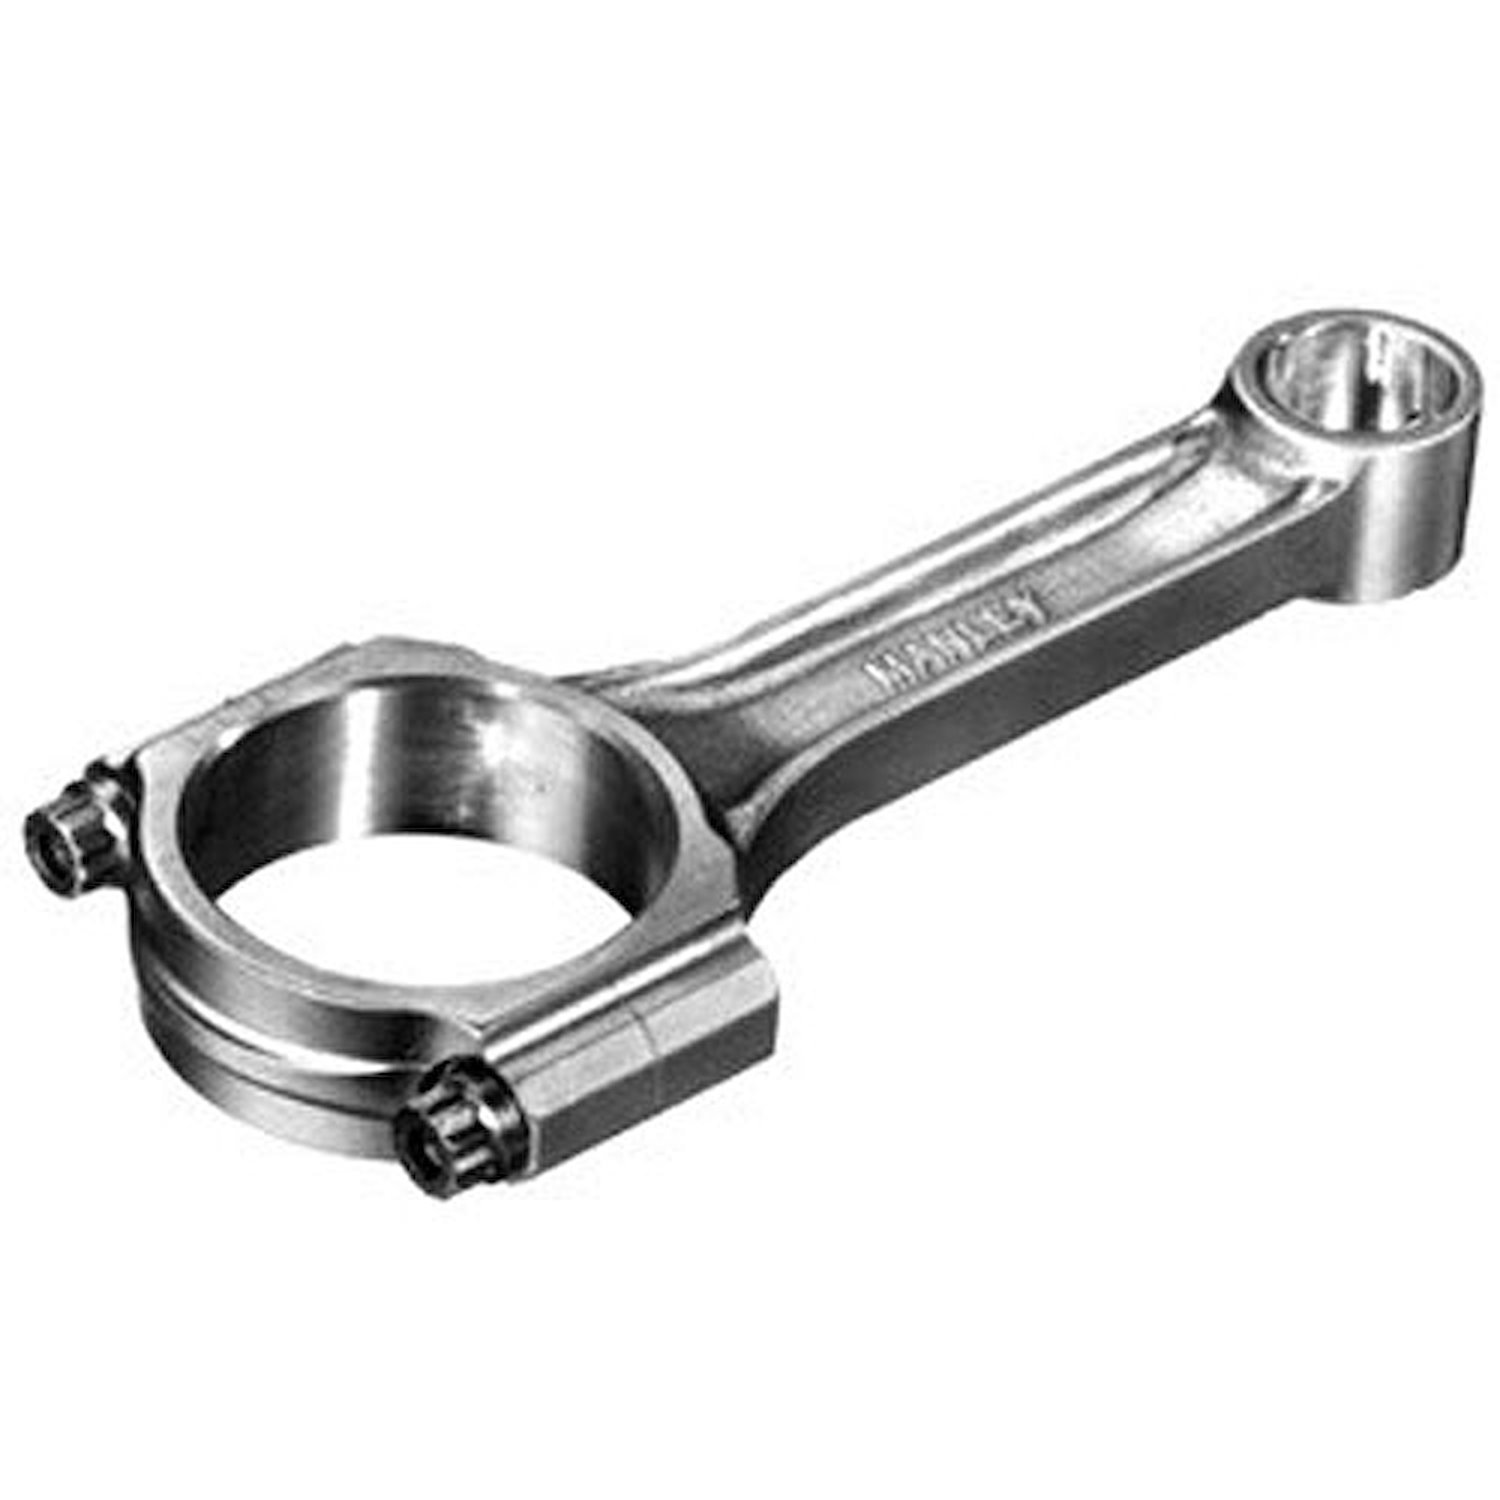 Sportsmaster Connecting Rods Center-to-Center: 5.7"